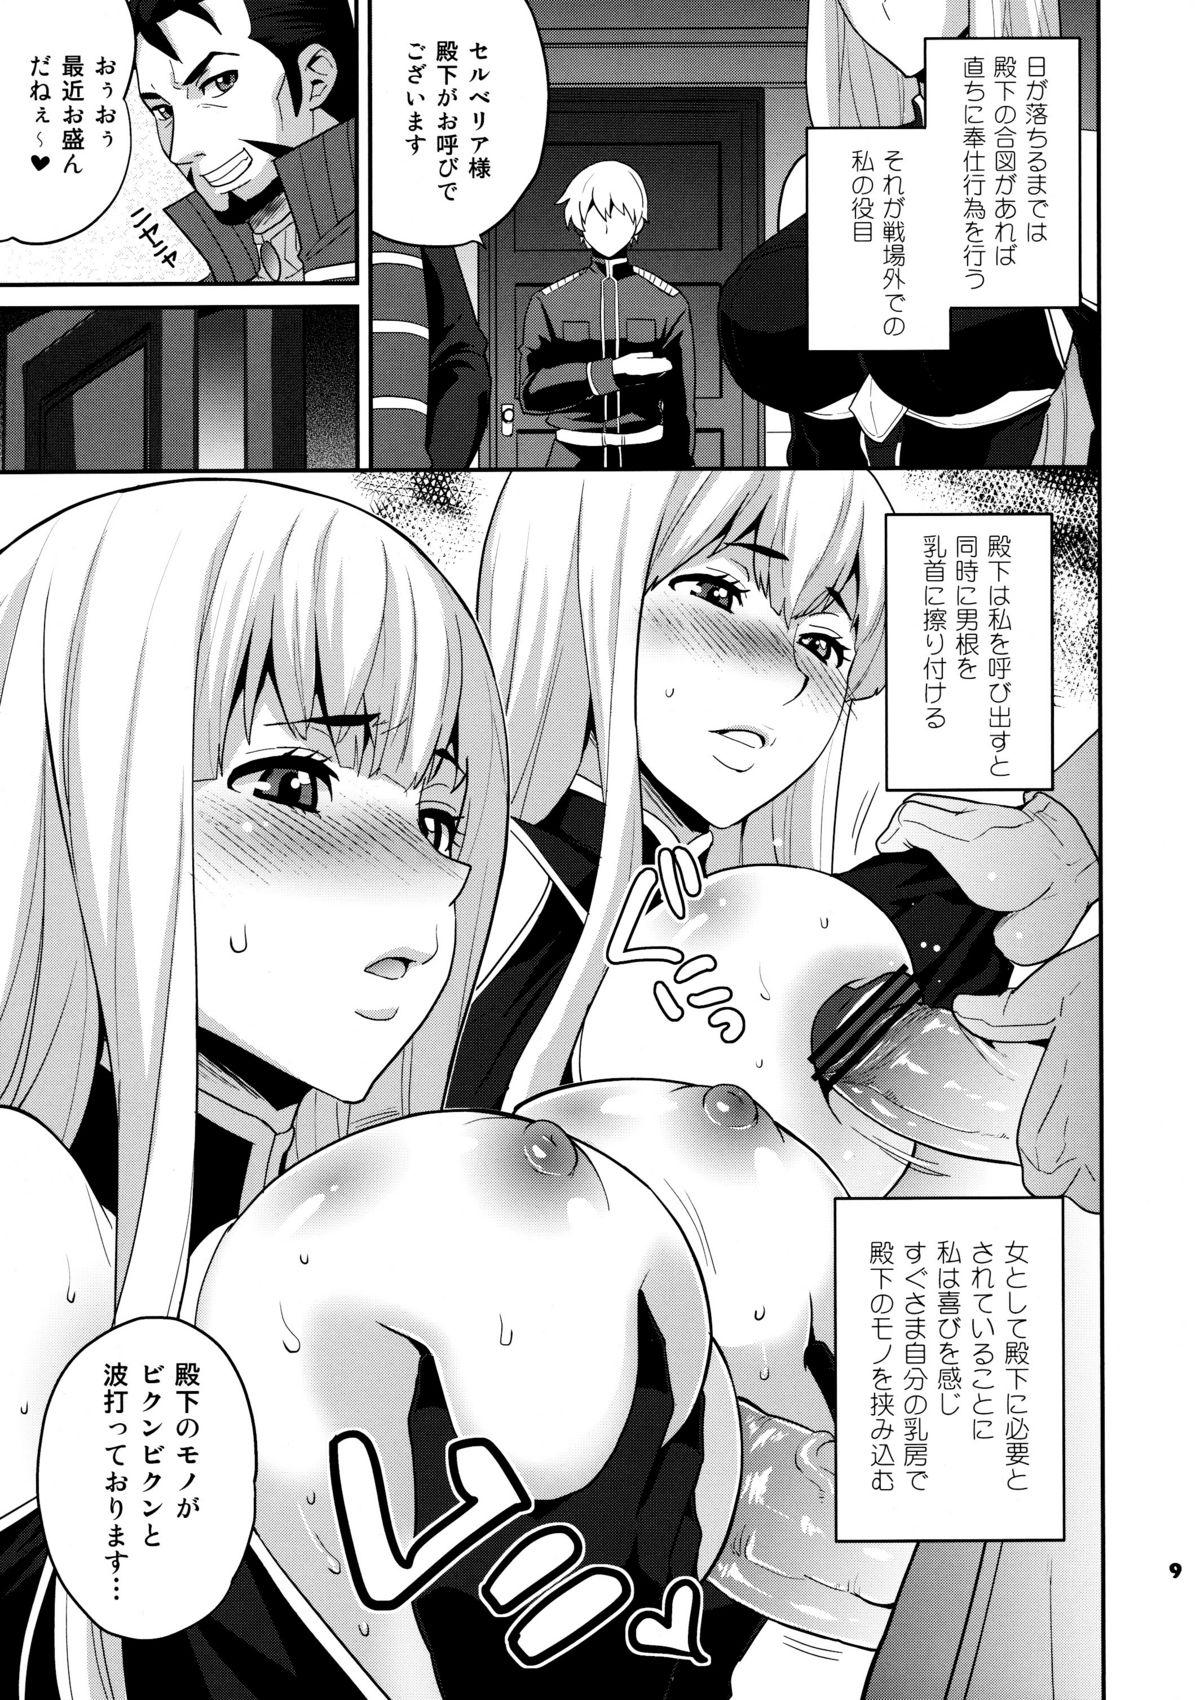 Unshaved Blue Reflection - Valkyria chronicles Creampies - Page 9